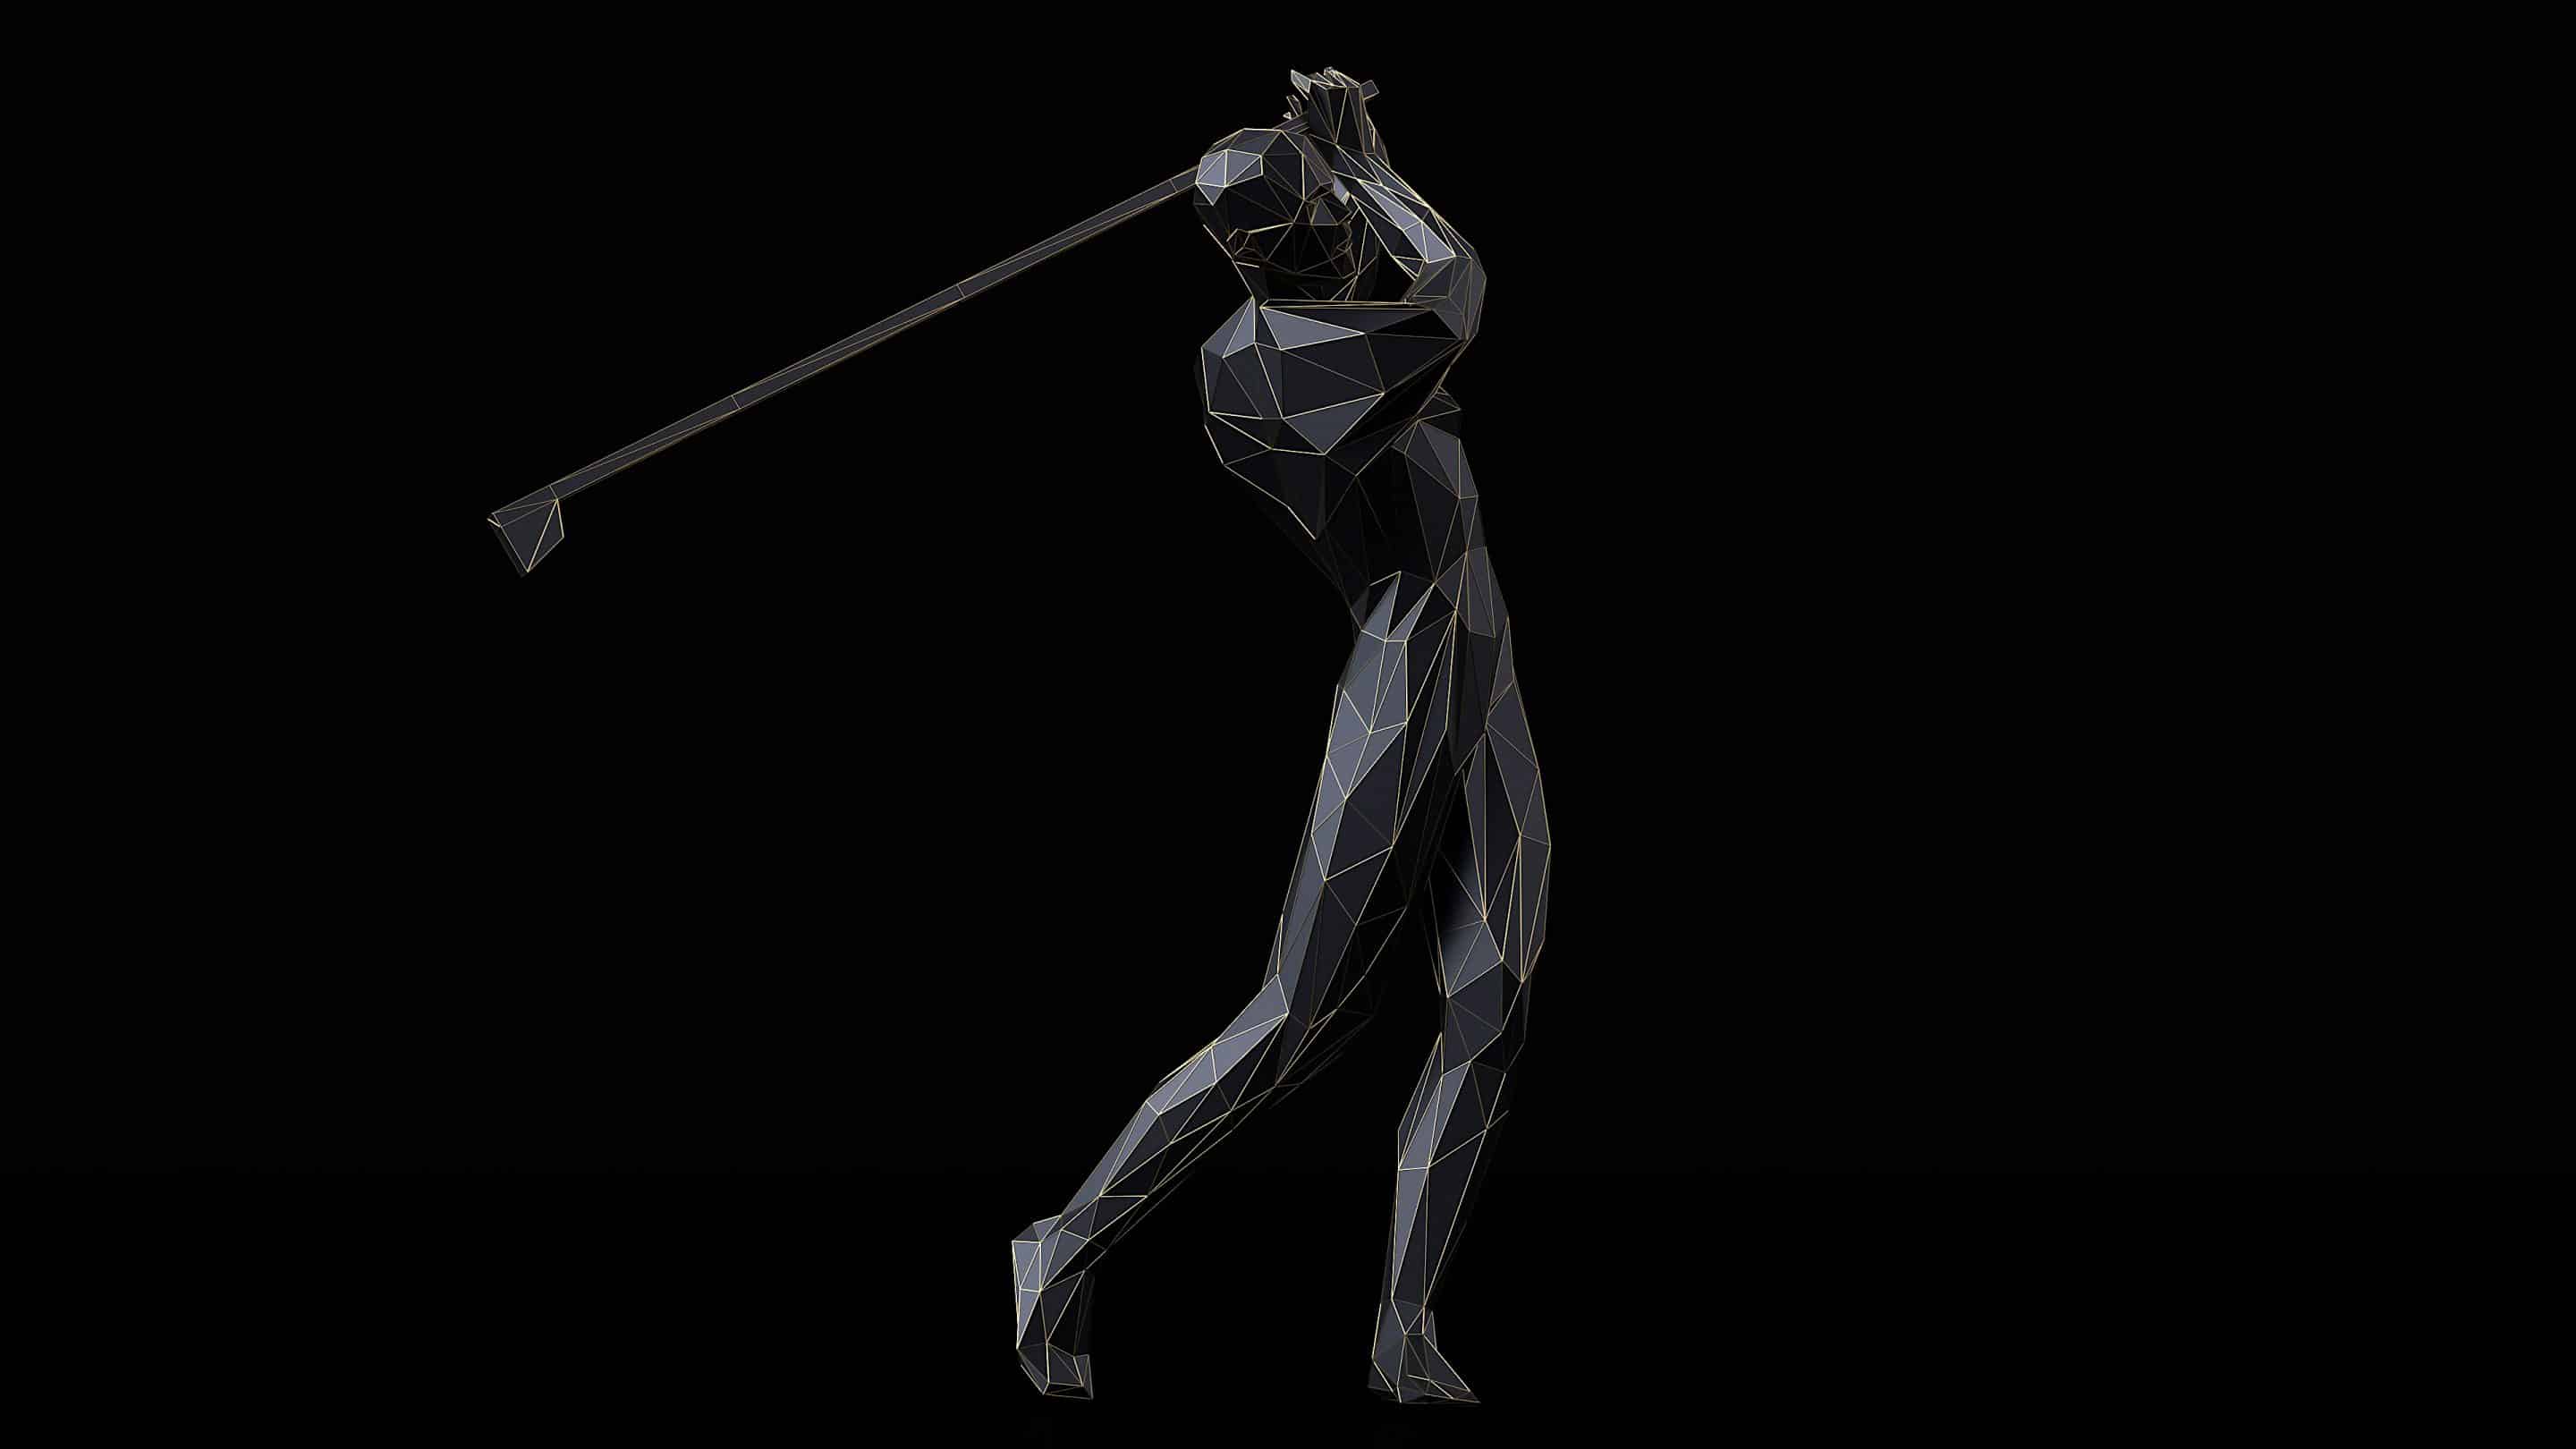 A 3D model of a golfer swinging a club, ideal for golfers in Santa Rosa looking for strength training.